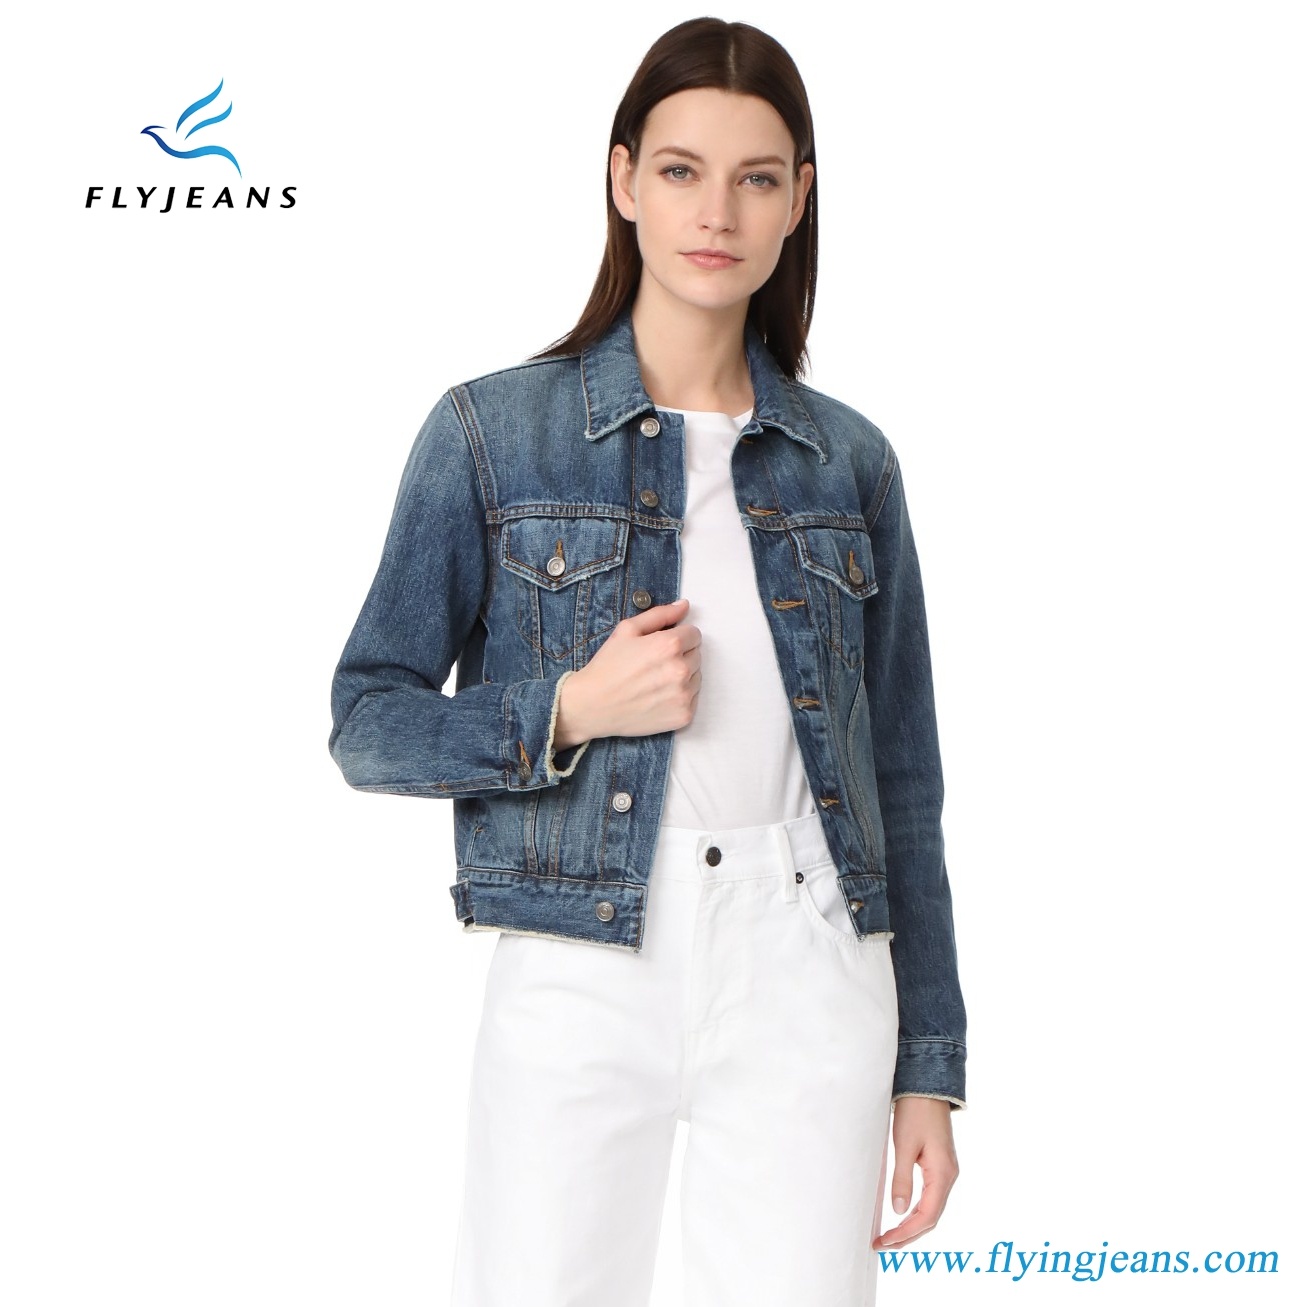 Classic Profile Short Ladies Denim Jean Jacket in Fold-Over Collar and Button Placket